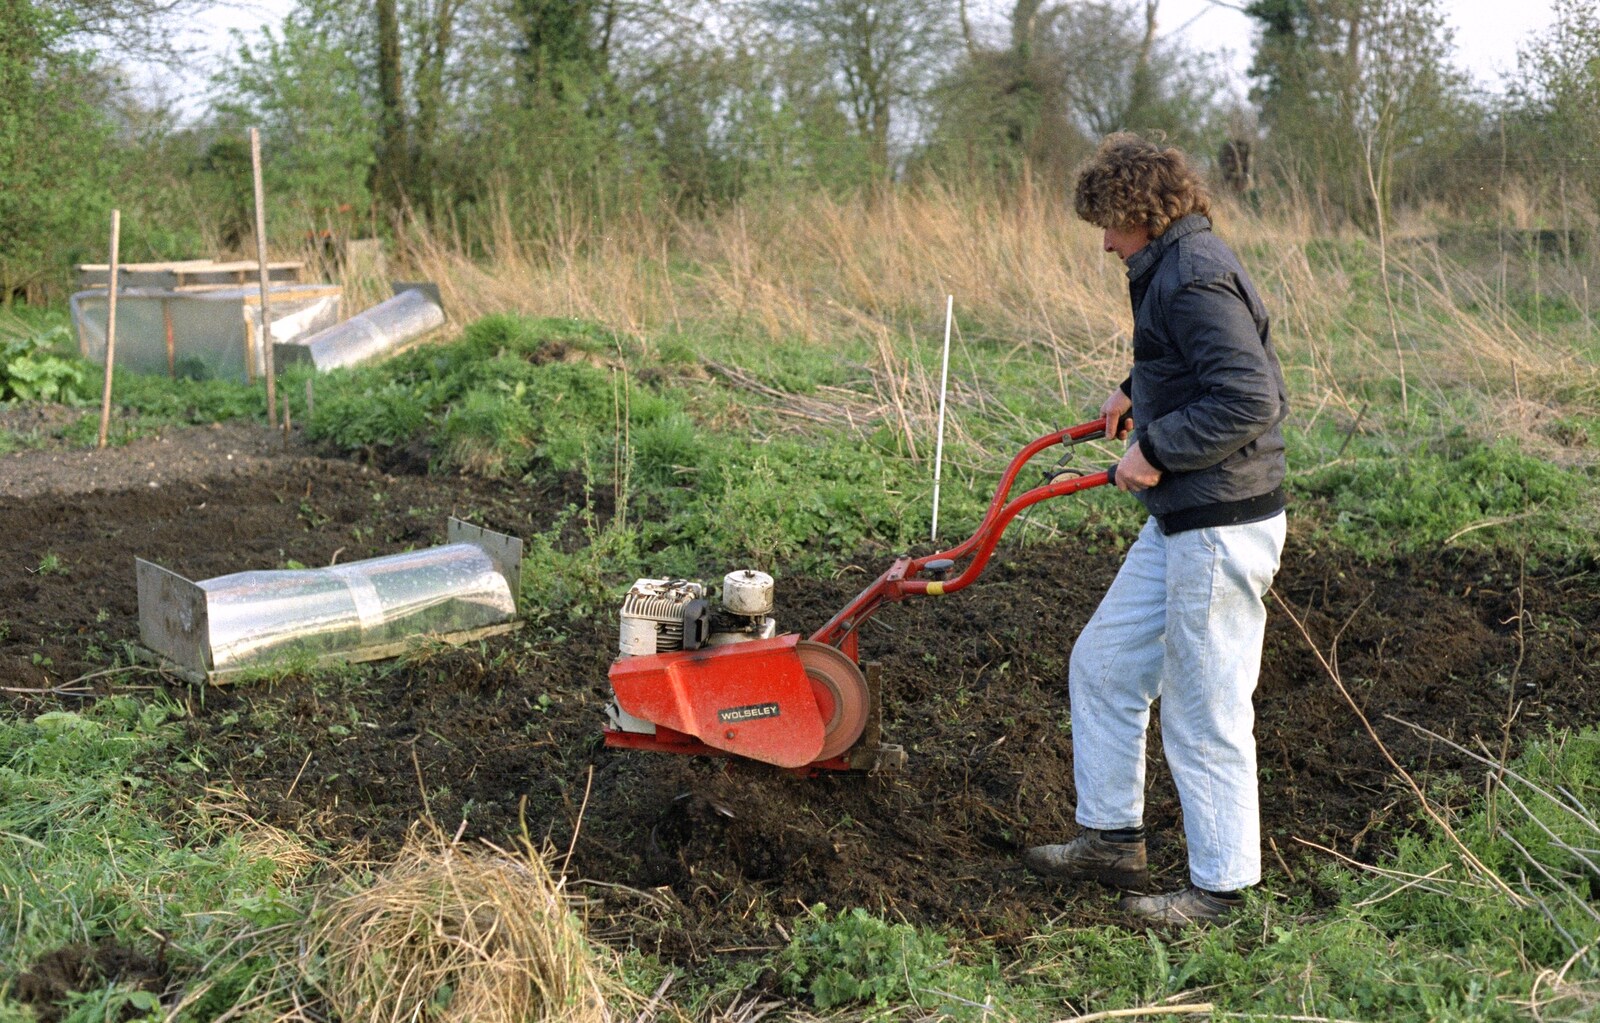 Brenda digs up some land with a rotivator from The Election Caravan and a View from a Cherry Picker, Stuston, Suffolk - 9th April 1992